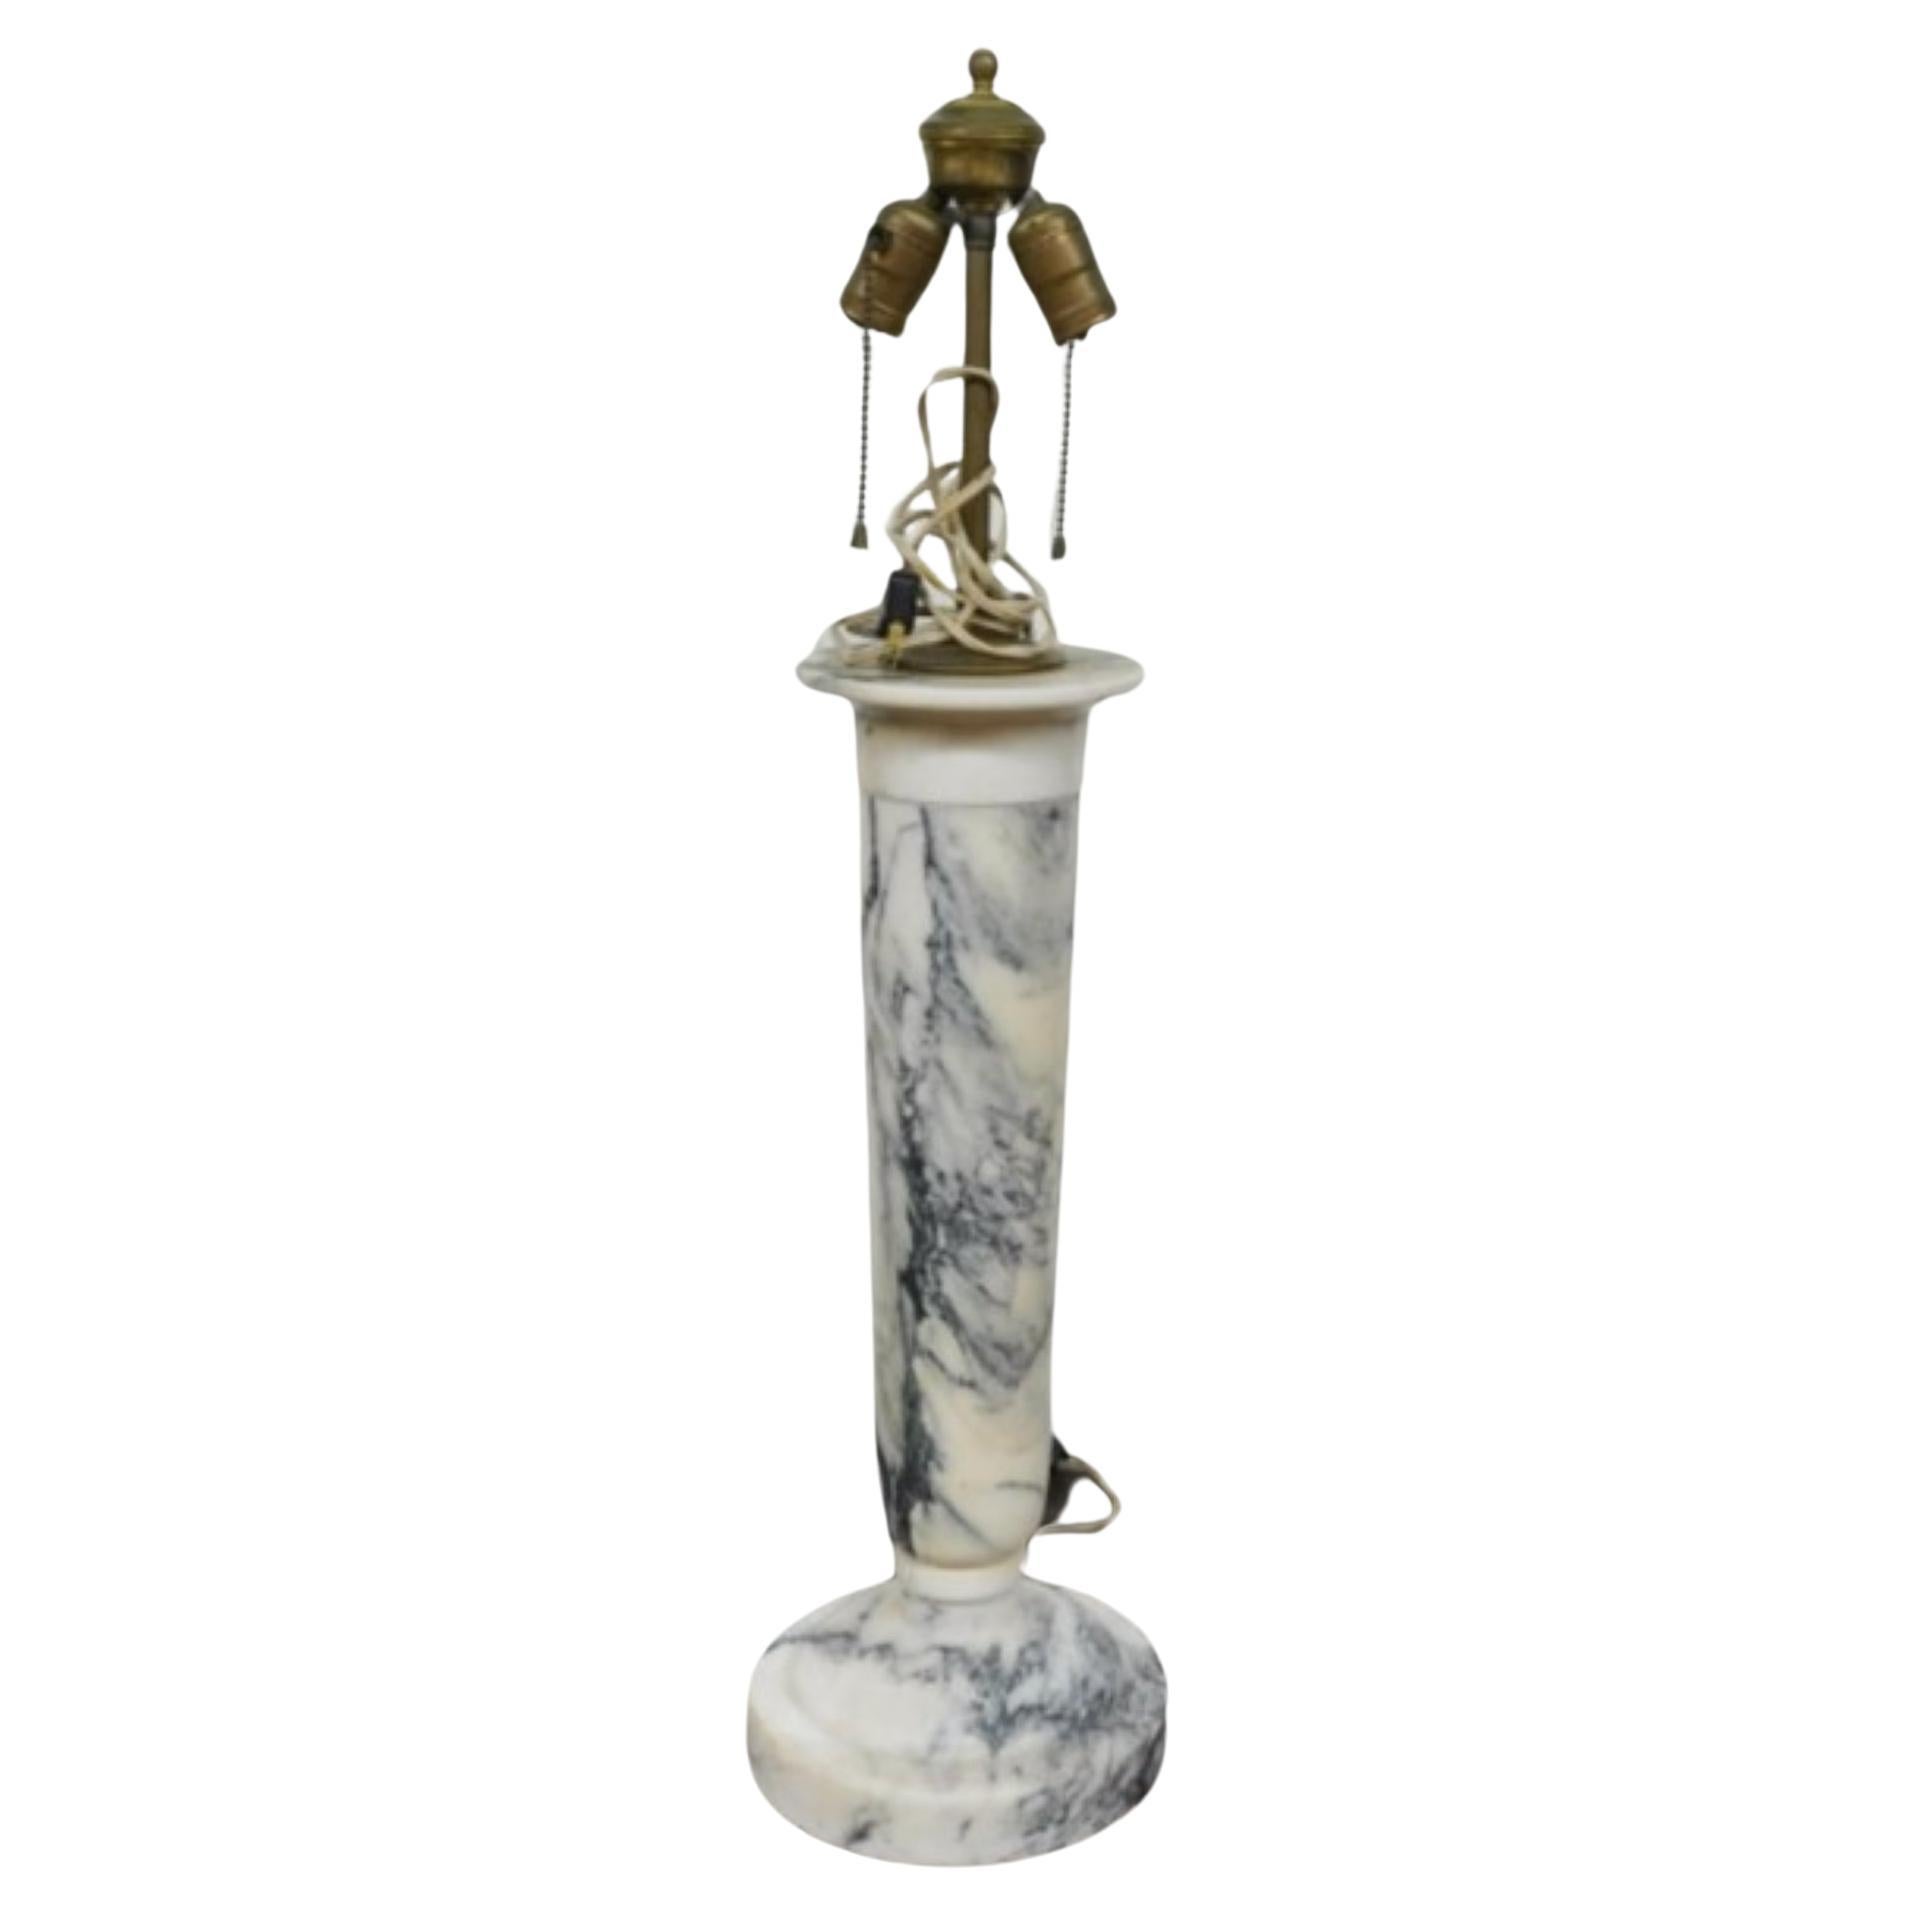 A stylish Italian Neoclassical Style two light Marble Table Lamp. Very good condition. Measures .
Measures 6